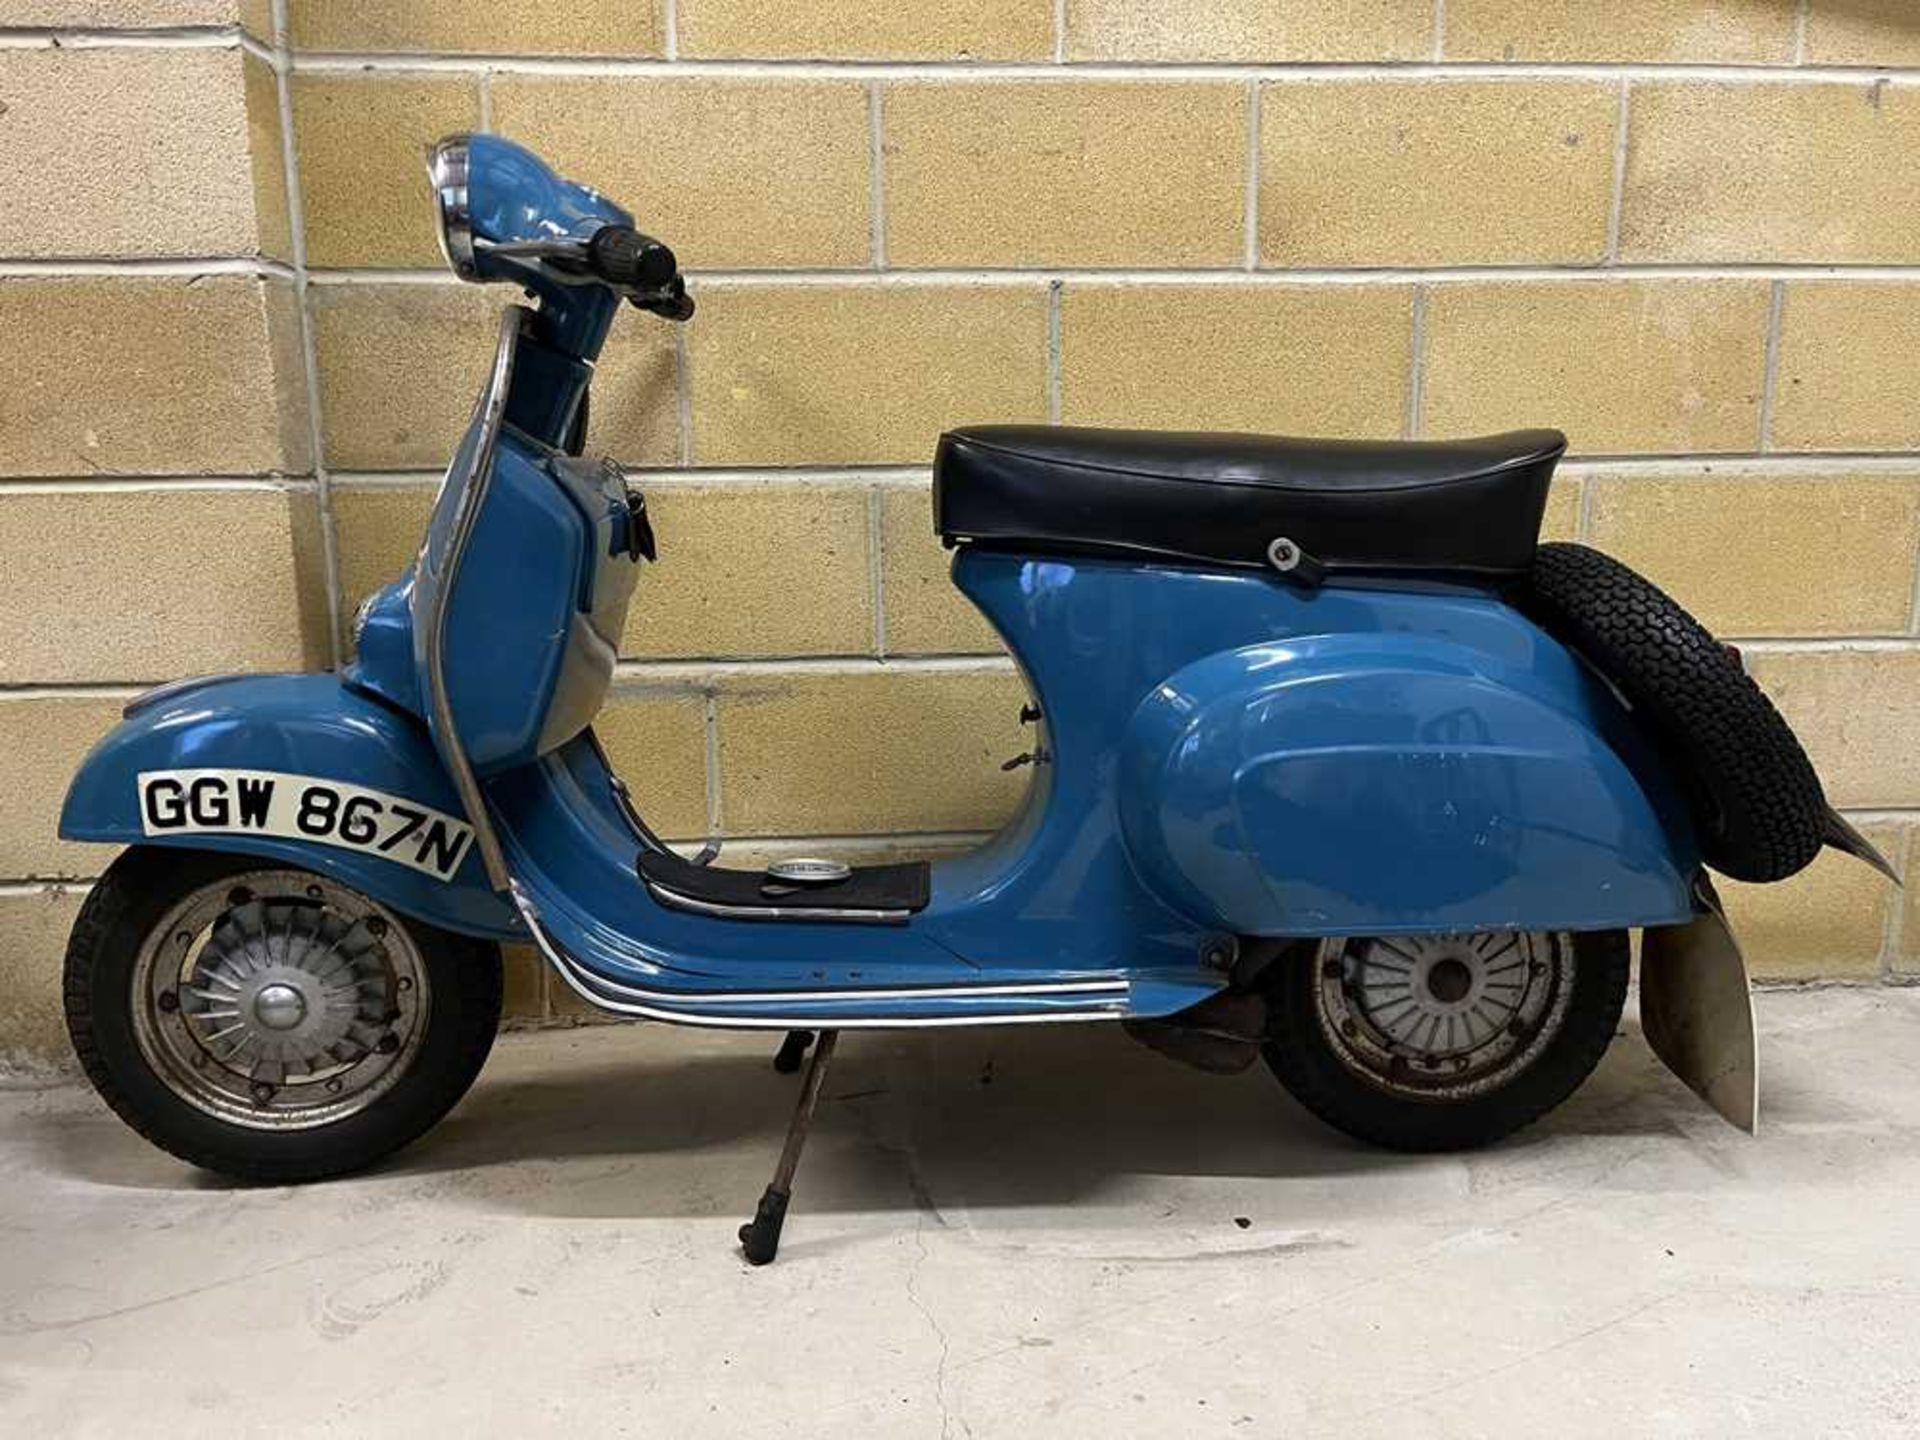 1974 Vespa (Douglas) Motovespa SU66 125 Super Extremely original and one owner from new - Image 2 of 93